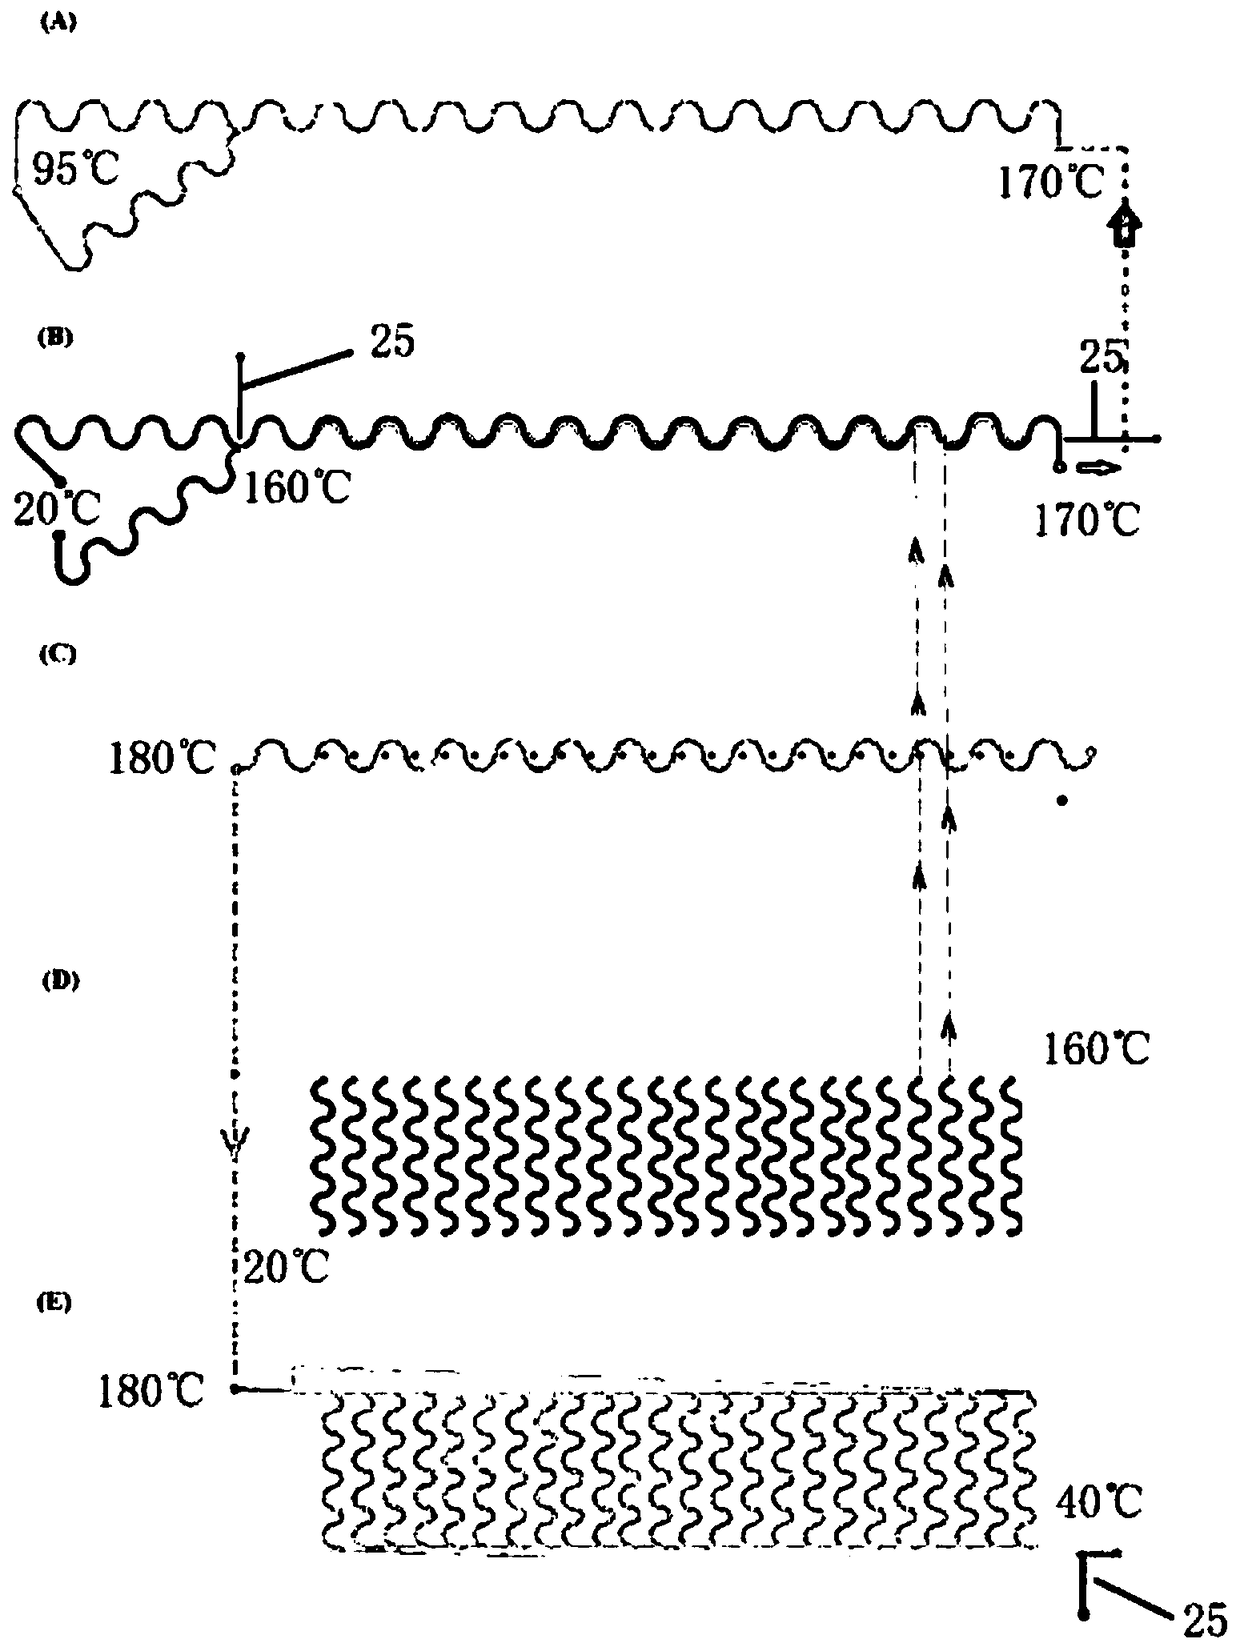 Apparatus and method for rapid hydrothermal synthesis